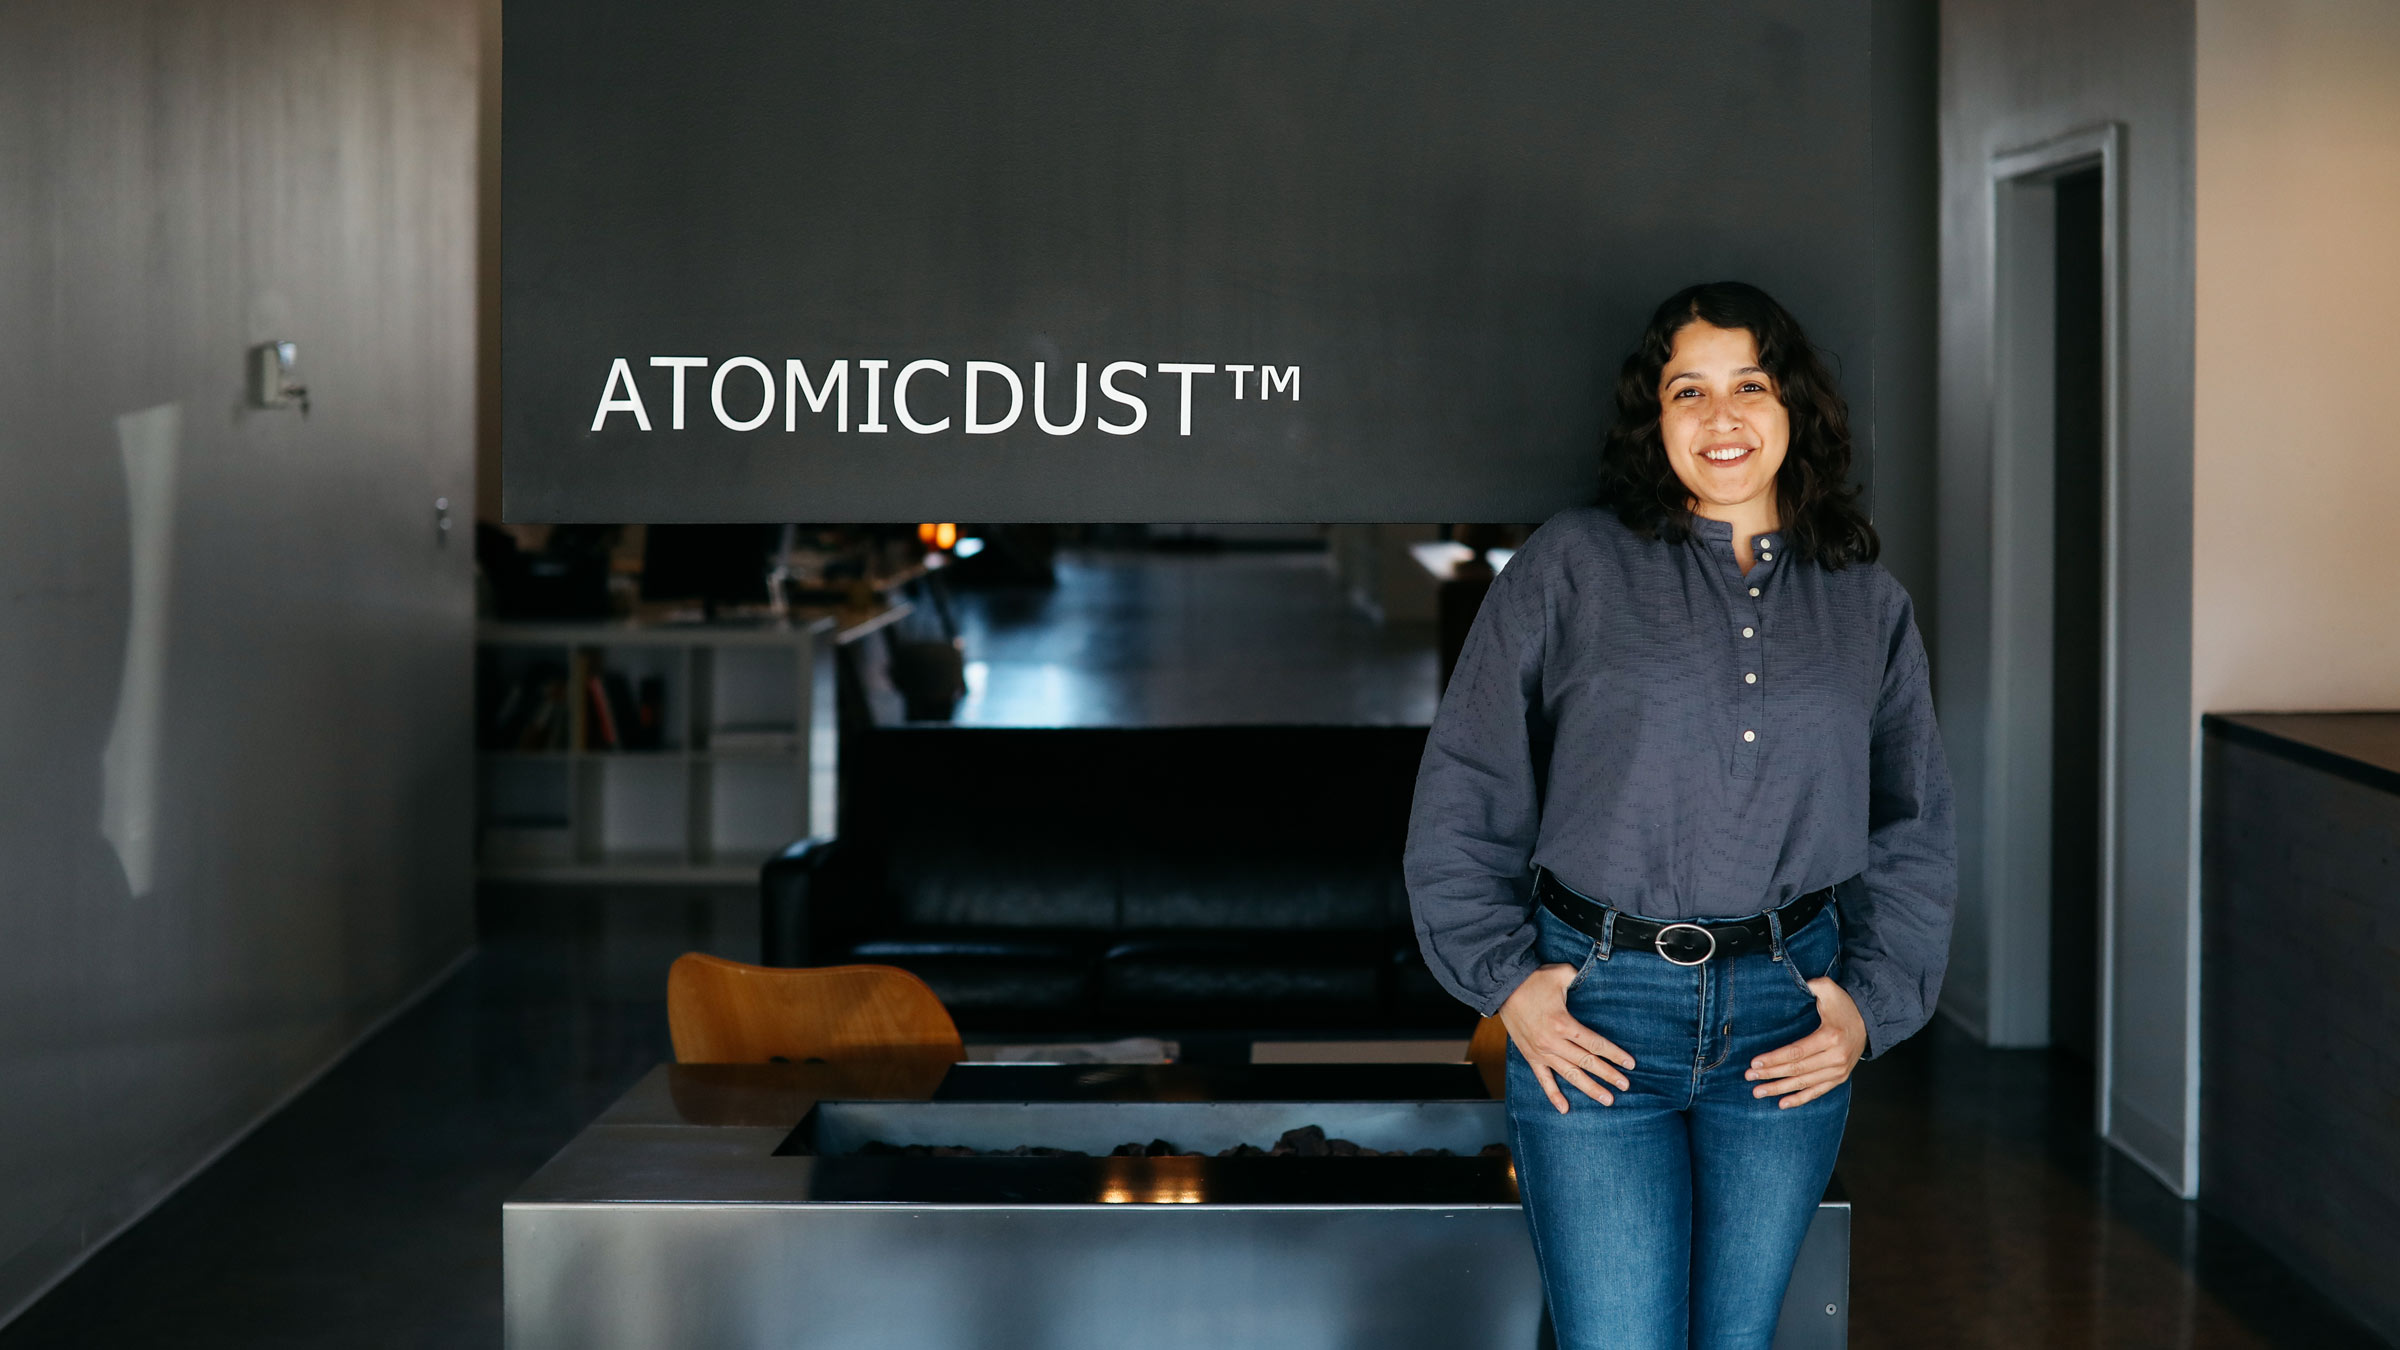 Account Manager Lauren Lowe in the Atomicdust office